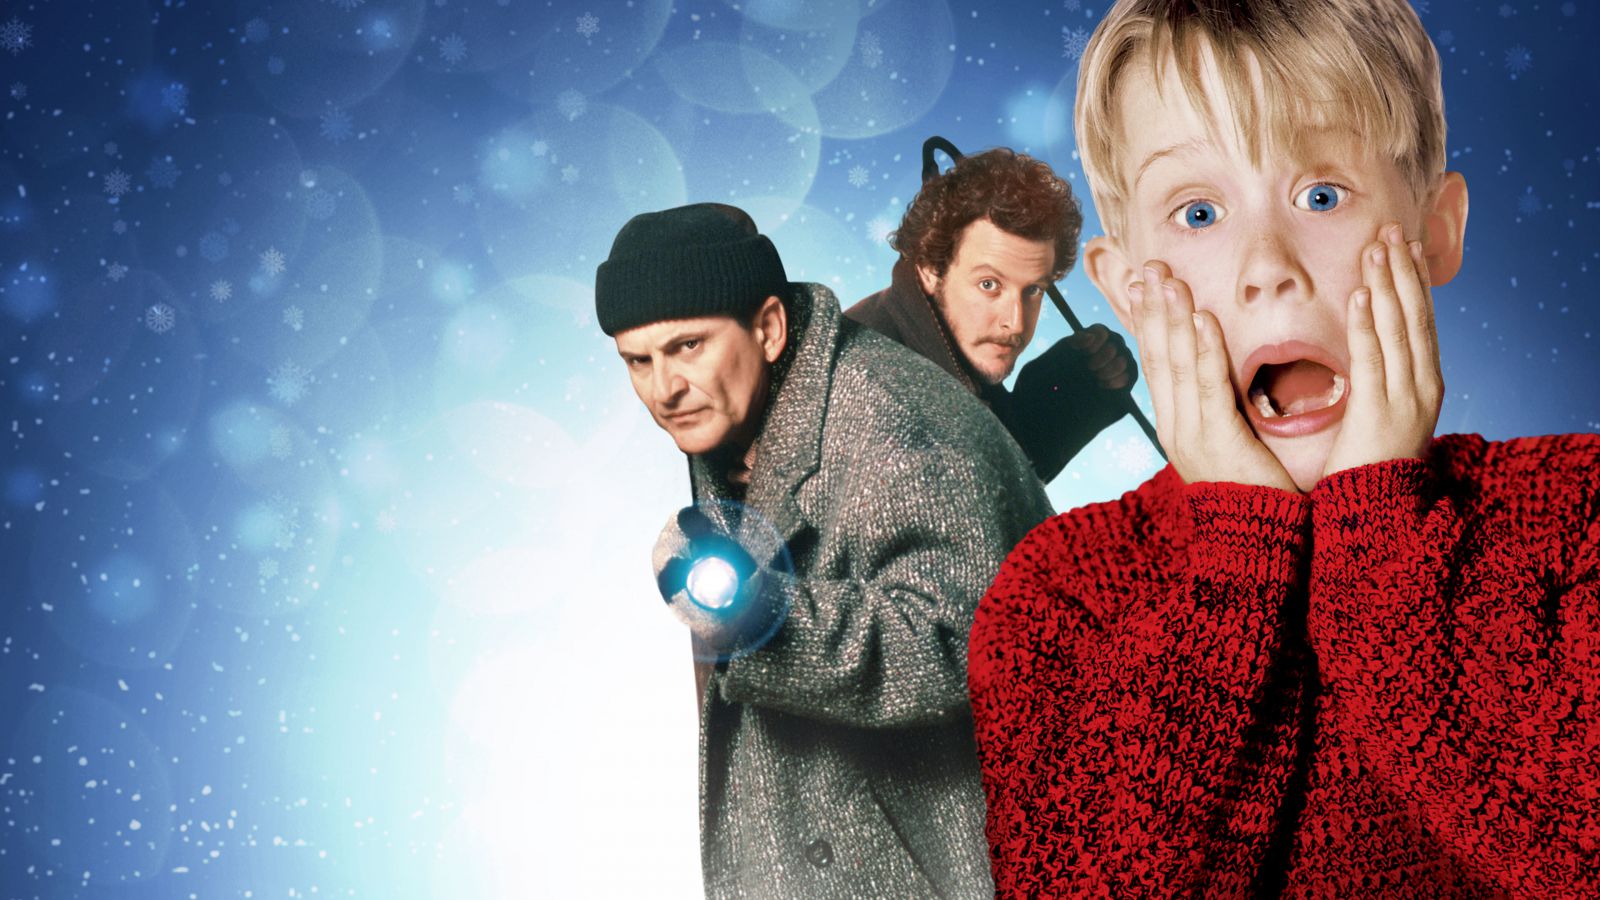 Comedy Movies, Family Movies, Home Alone 1990, Watch Home Alone 1990 Full HD Free Online, Home Alone 1990 1080P Free Online, Watch Movie Home Alone 1990 Full Free Online, Watch Home Alone 1990 Full HD 1080P Free Online Full Movie, Home Alone 4, Watch Movies Home Alone 2 Lost in New York Full Free Online, Christmas Home Sweet Home Alone Movies, Watch Home Alone 3 1997 HD Online, Home Alone 3 1997, Watch Film Home Alone 3 Free Online, Christmas Home Alone 2 Lost in New York Free Online, Watch Film Home Sweet Home Alone 2021 Full Free Online, Home Sweet Home Alone 2021, Download Movie Home Alone 4 Full HD Free, A Boy Called Christmas, A Castle for Christmas, A Tiny House Christmas 2021